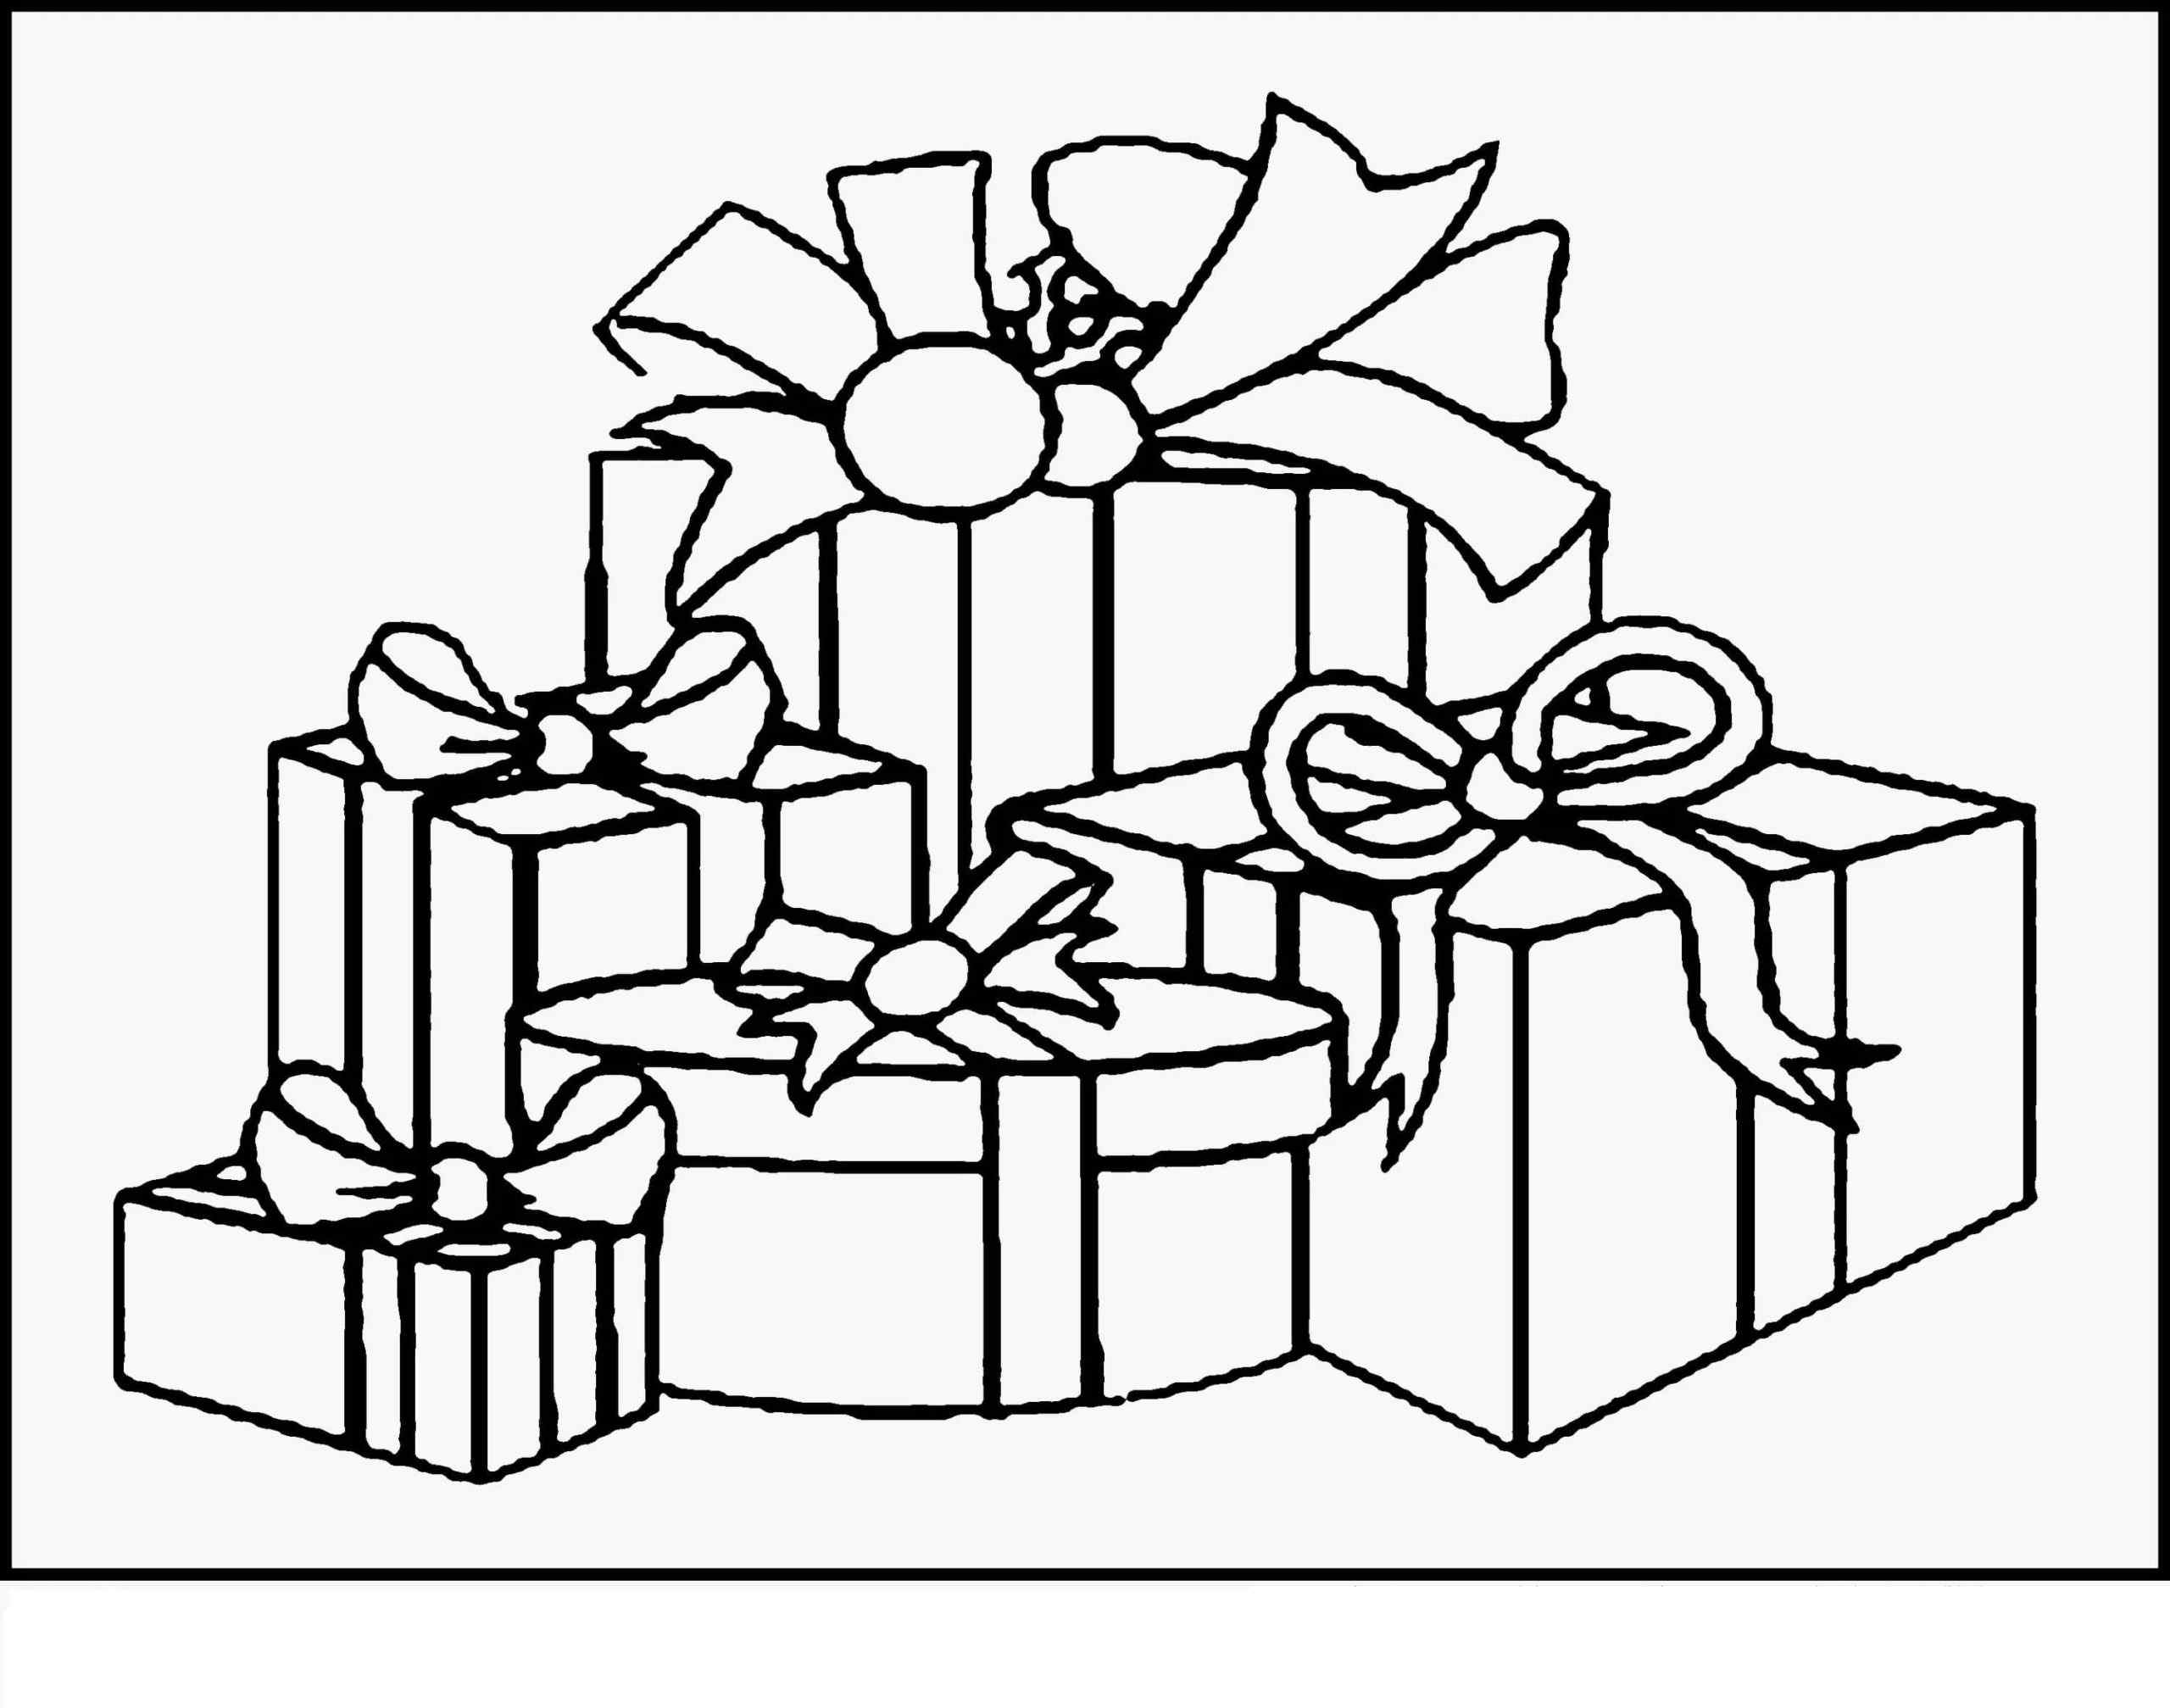 Five Gift Boxes Of Different Shapes